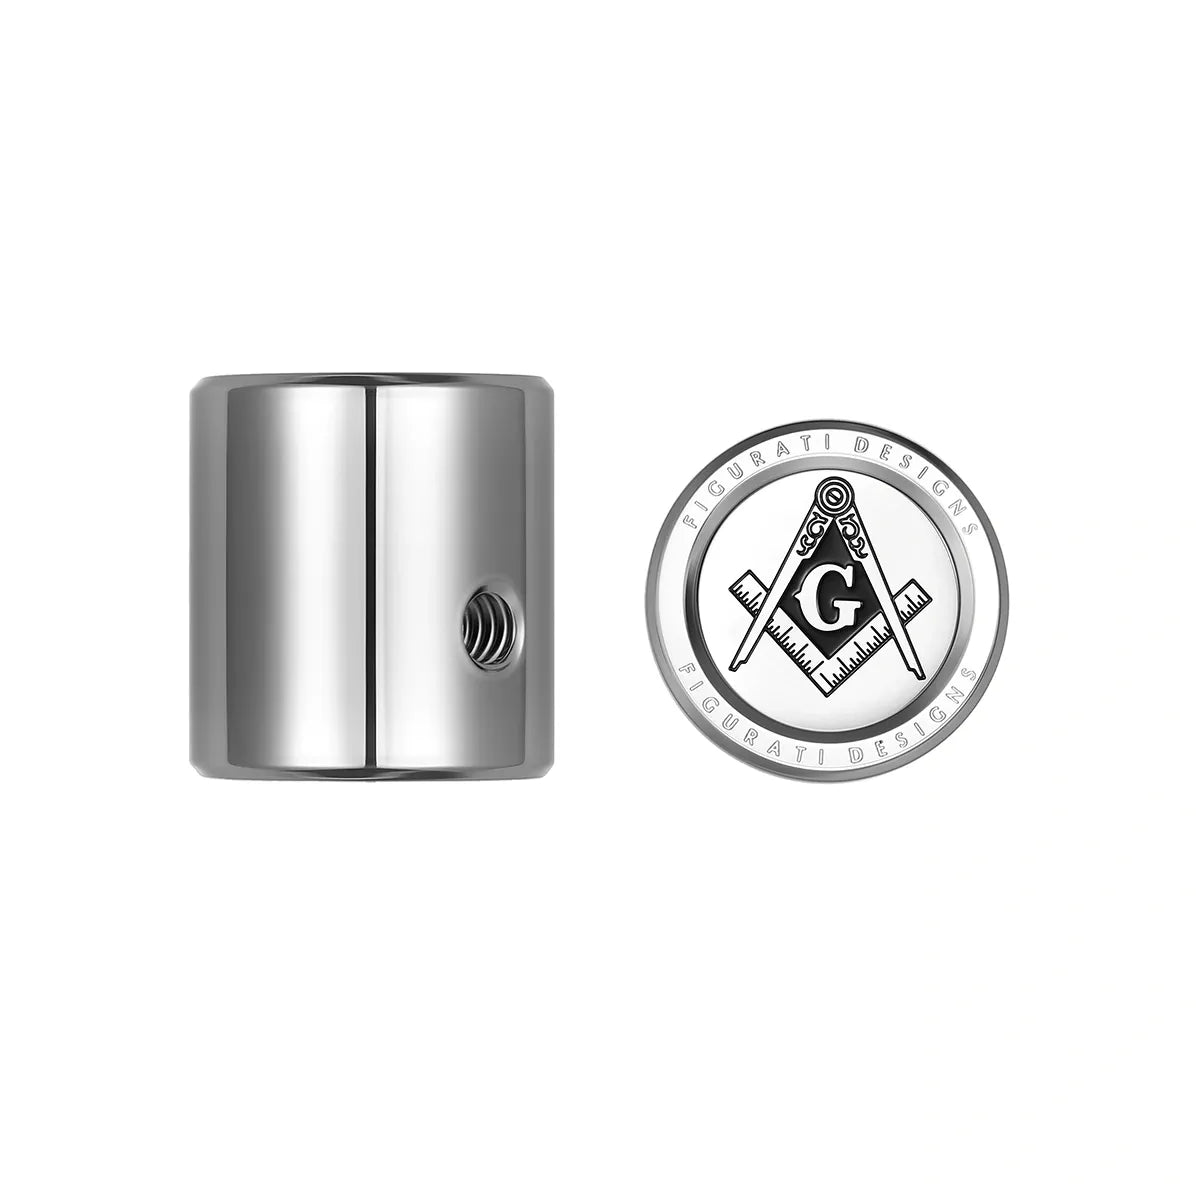 Heel Toe Shifter Cover - Stainless-Steel Masonic Emblem